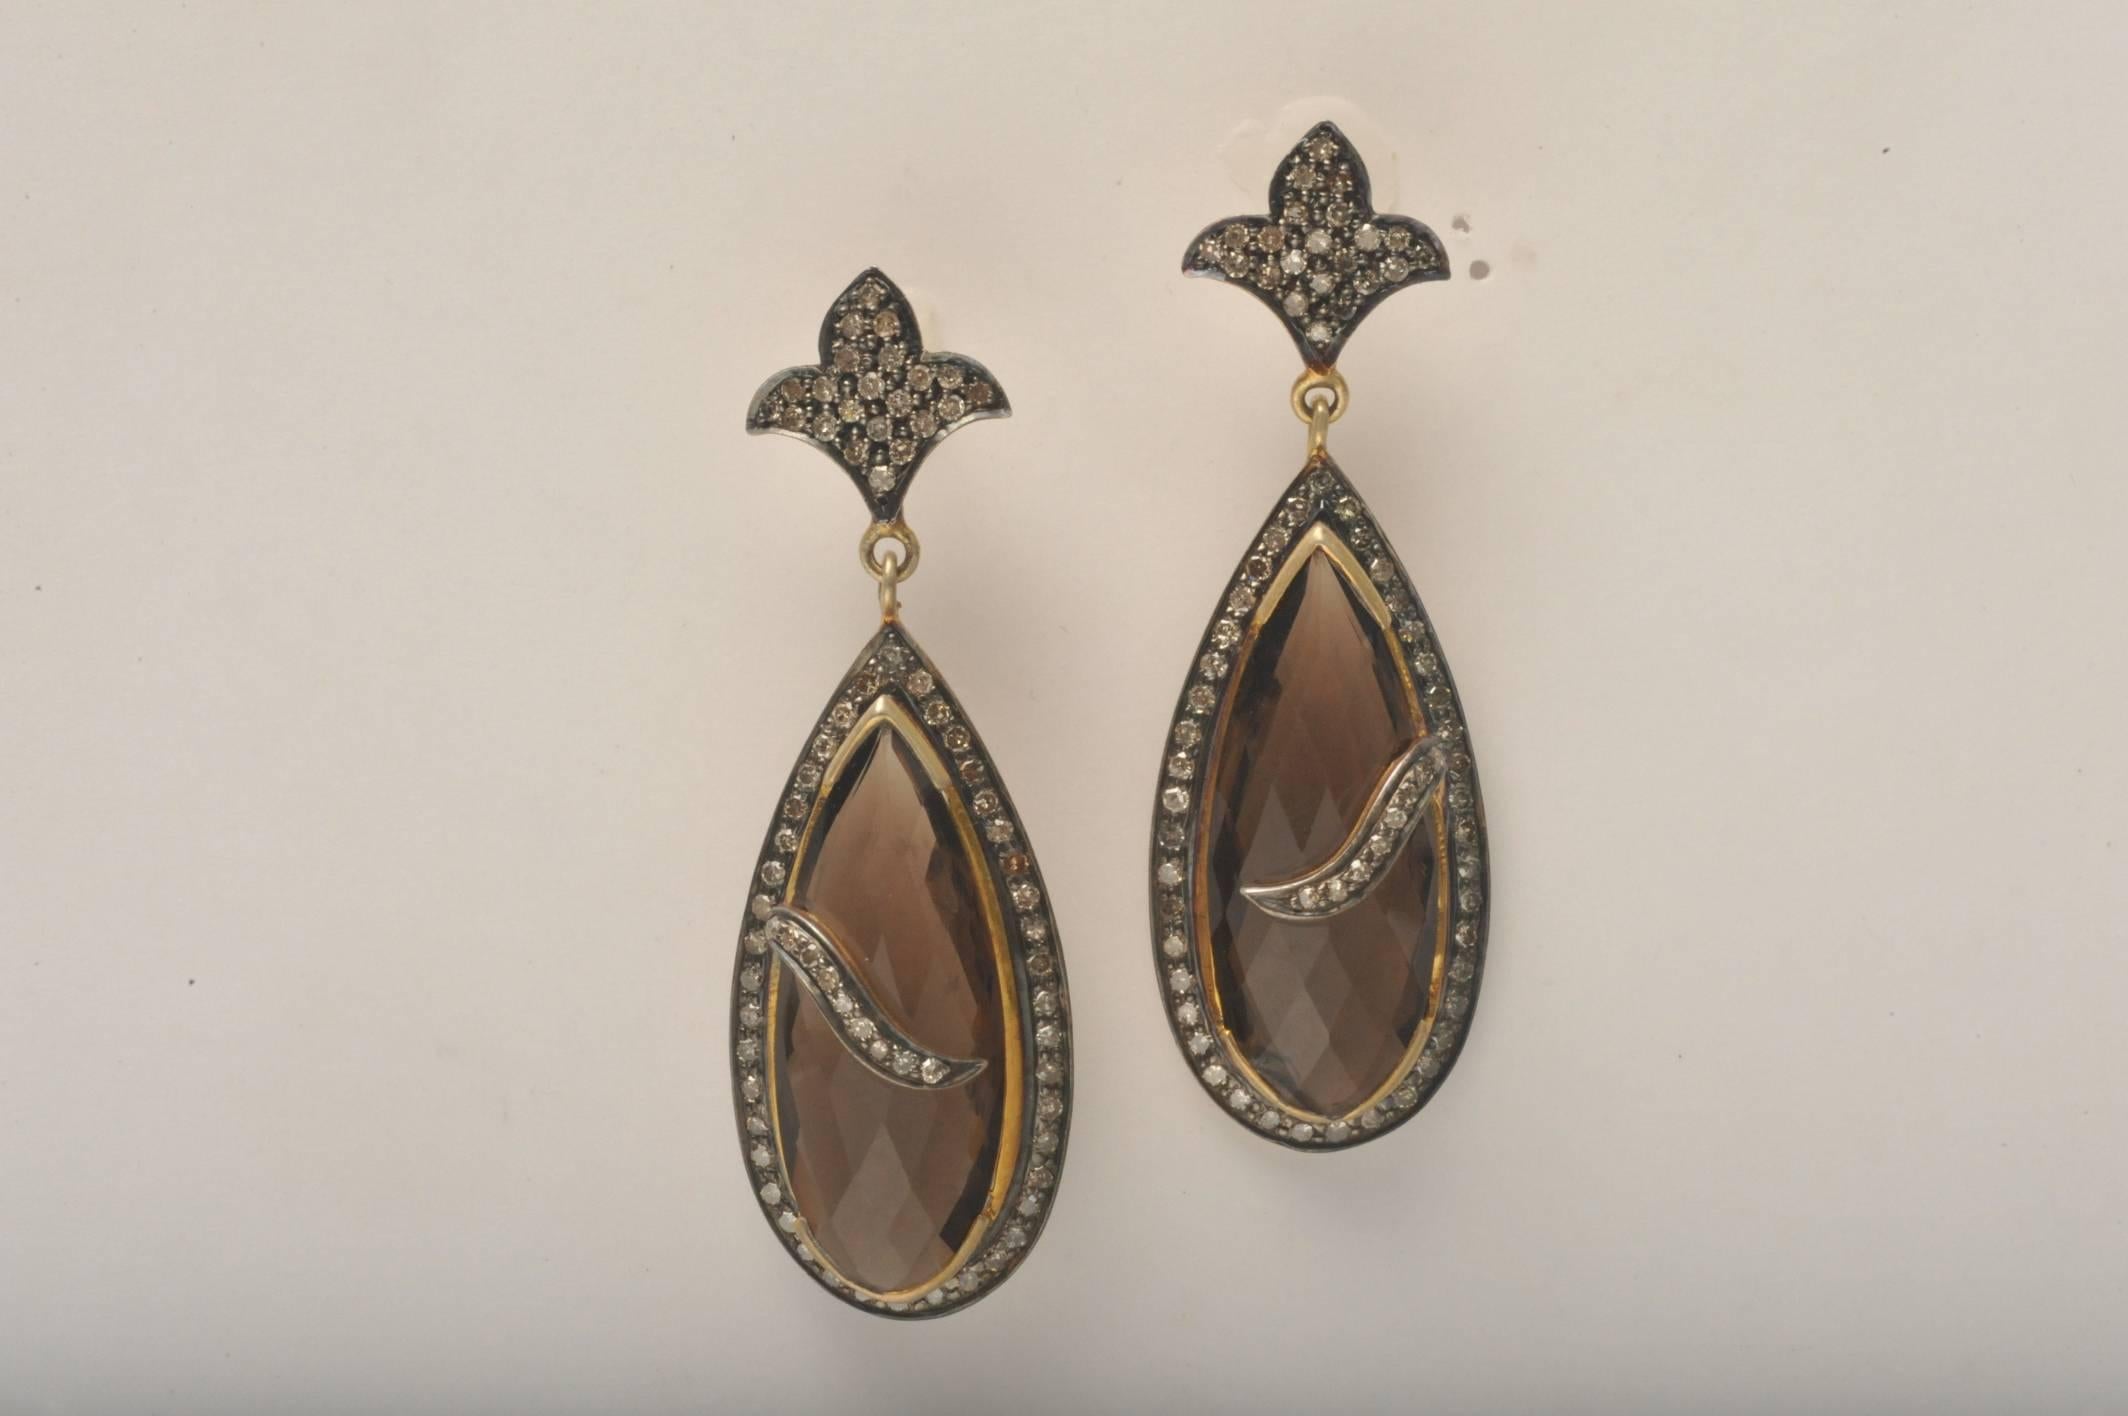 Pair of unusual faceted smokey topaz pear-shaped earrings with pave`-set diamonds set in 18K gold and sterling silver.

Smokey topaz carat weight is 23.45
Diamond weight is 1.98